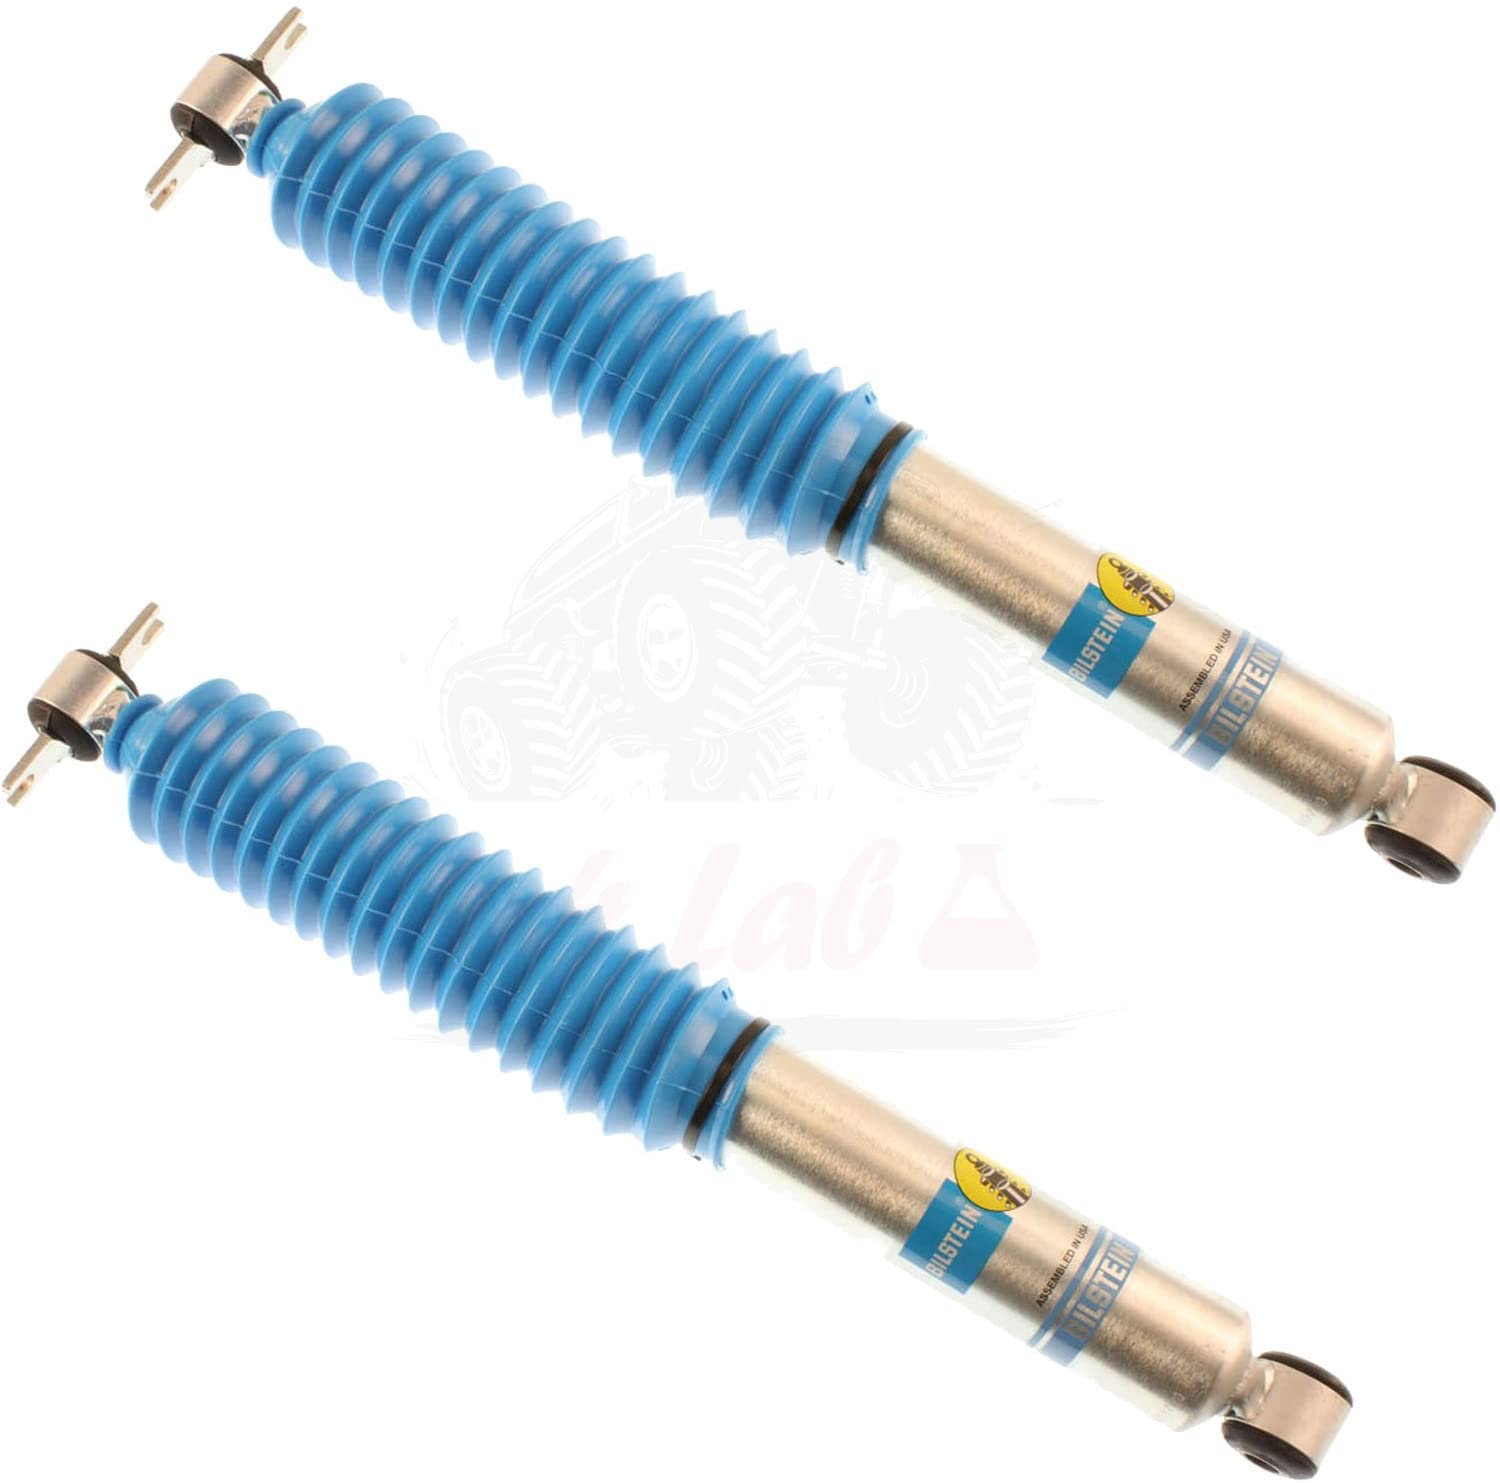 Bilstein B8 5100 Series 2 Rear Shocks Kit for 97-'06 Jeep Tj 0-2 inch lift Ride Monotube replacement Gas Charged Shock absorbers part number 24-186827